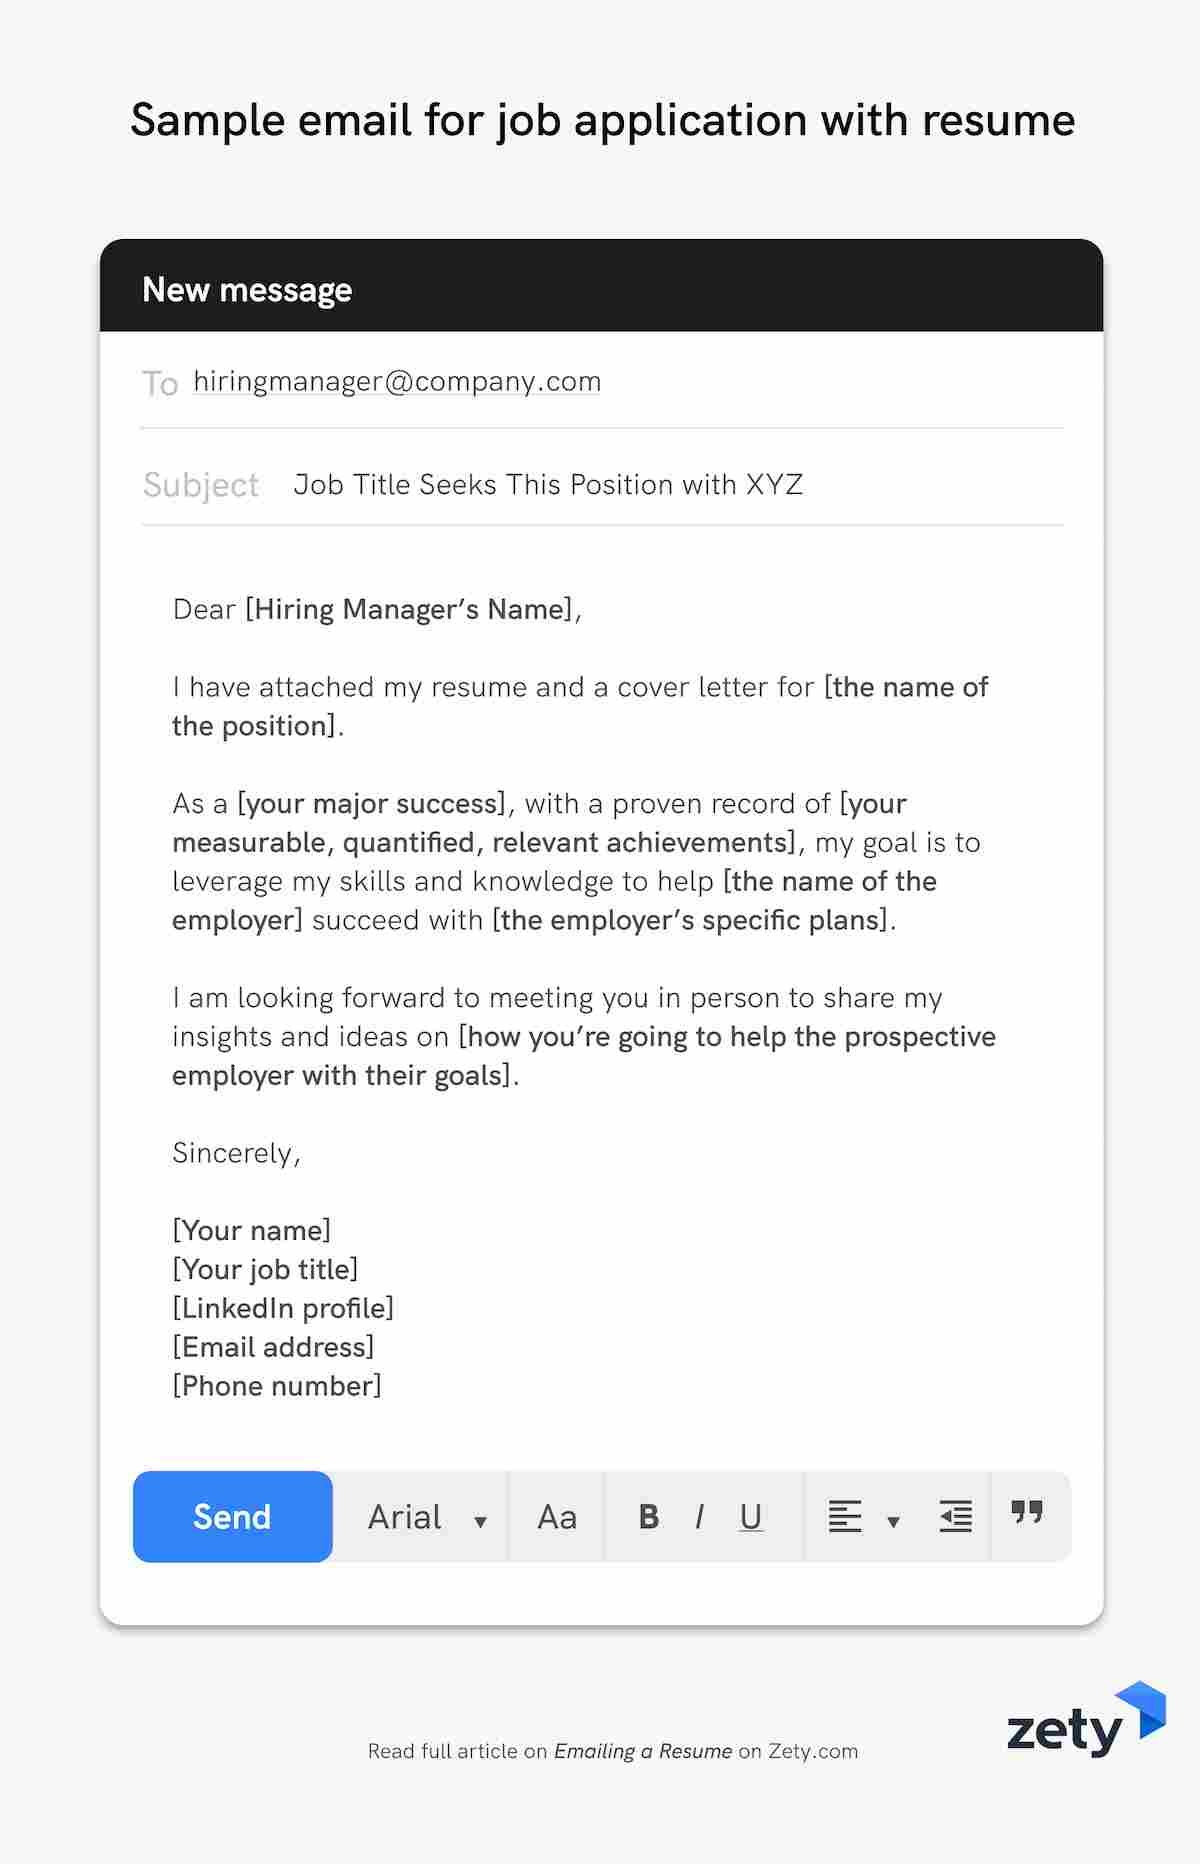 Email Cover Letter for Sending Resume Samples How to Email A Resume to An Employer: 12lancarrezekiq Email Examples